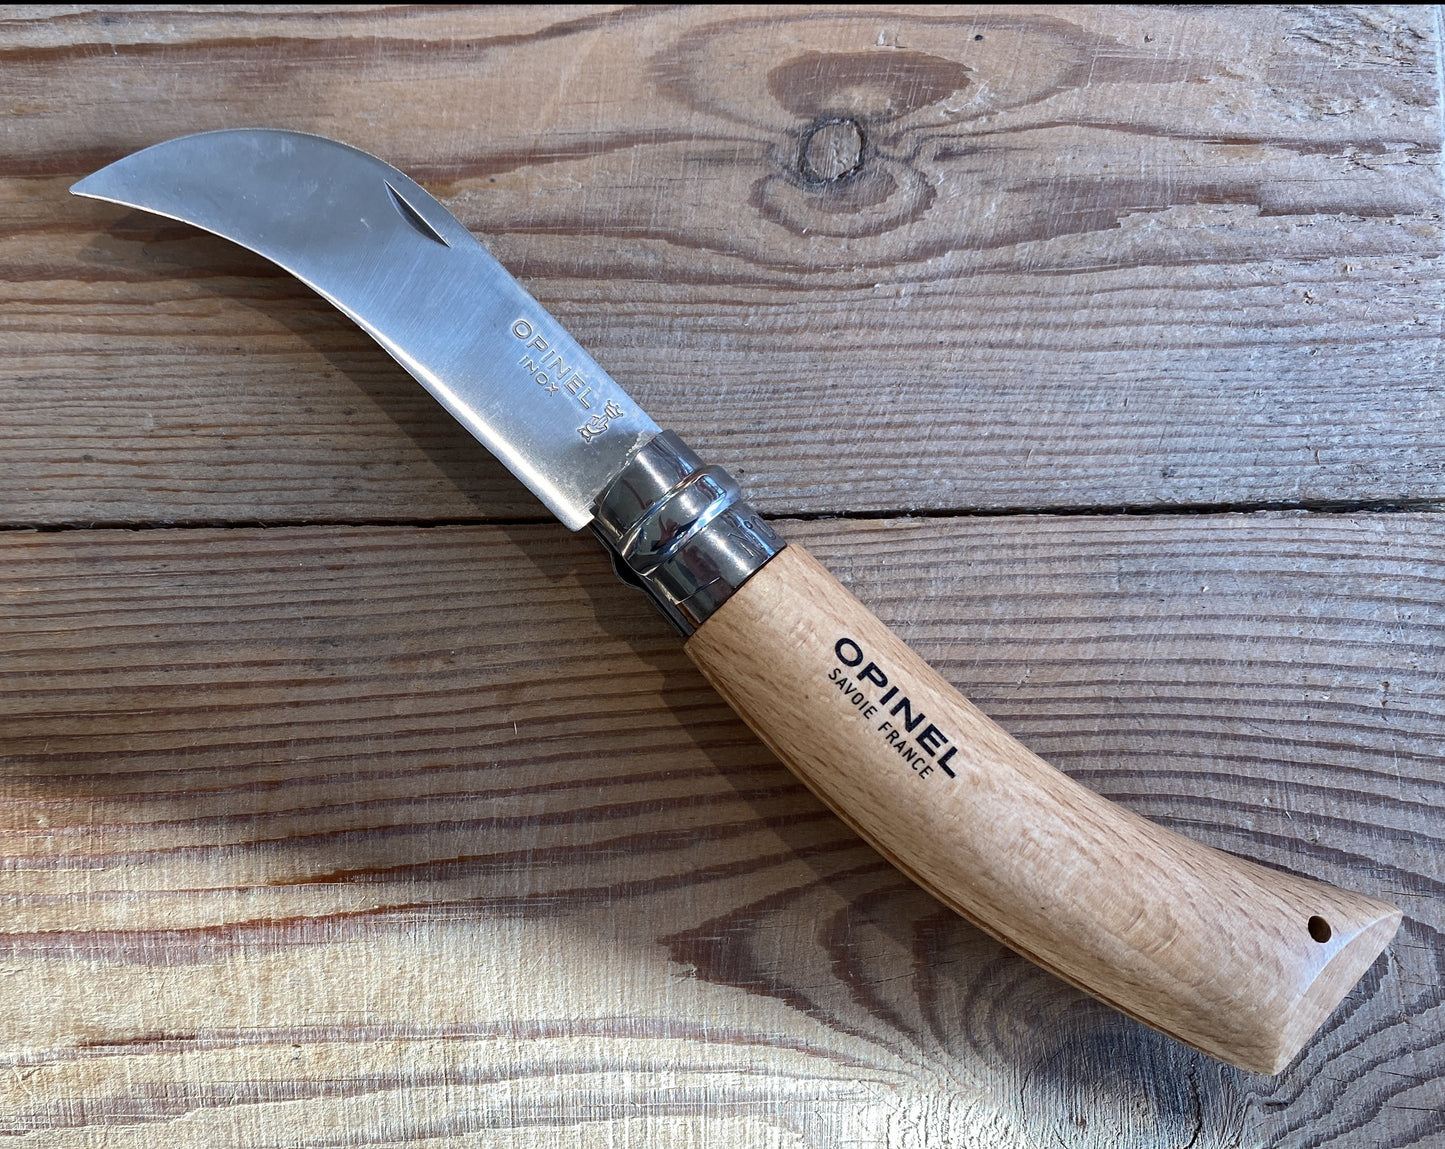 A stainless steel pruning folding knife from Opinel with a wooden handle laying on a wooden table